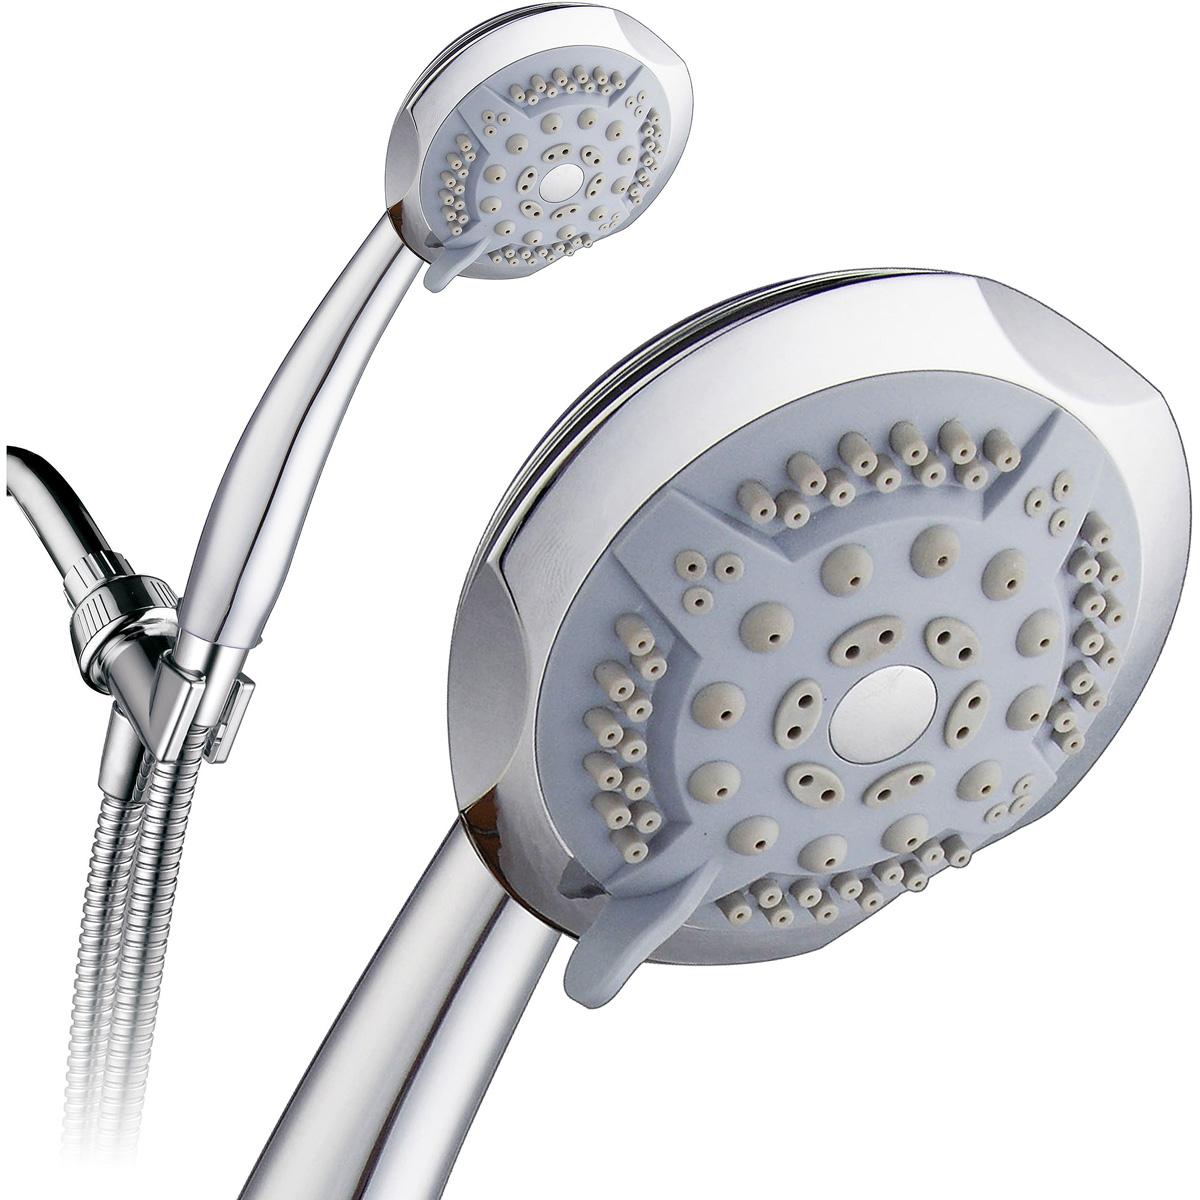 PowerSpa 5-Setting Deluxe Hand Shower for $7.74